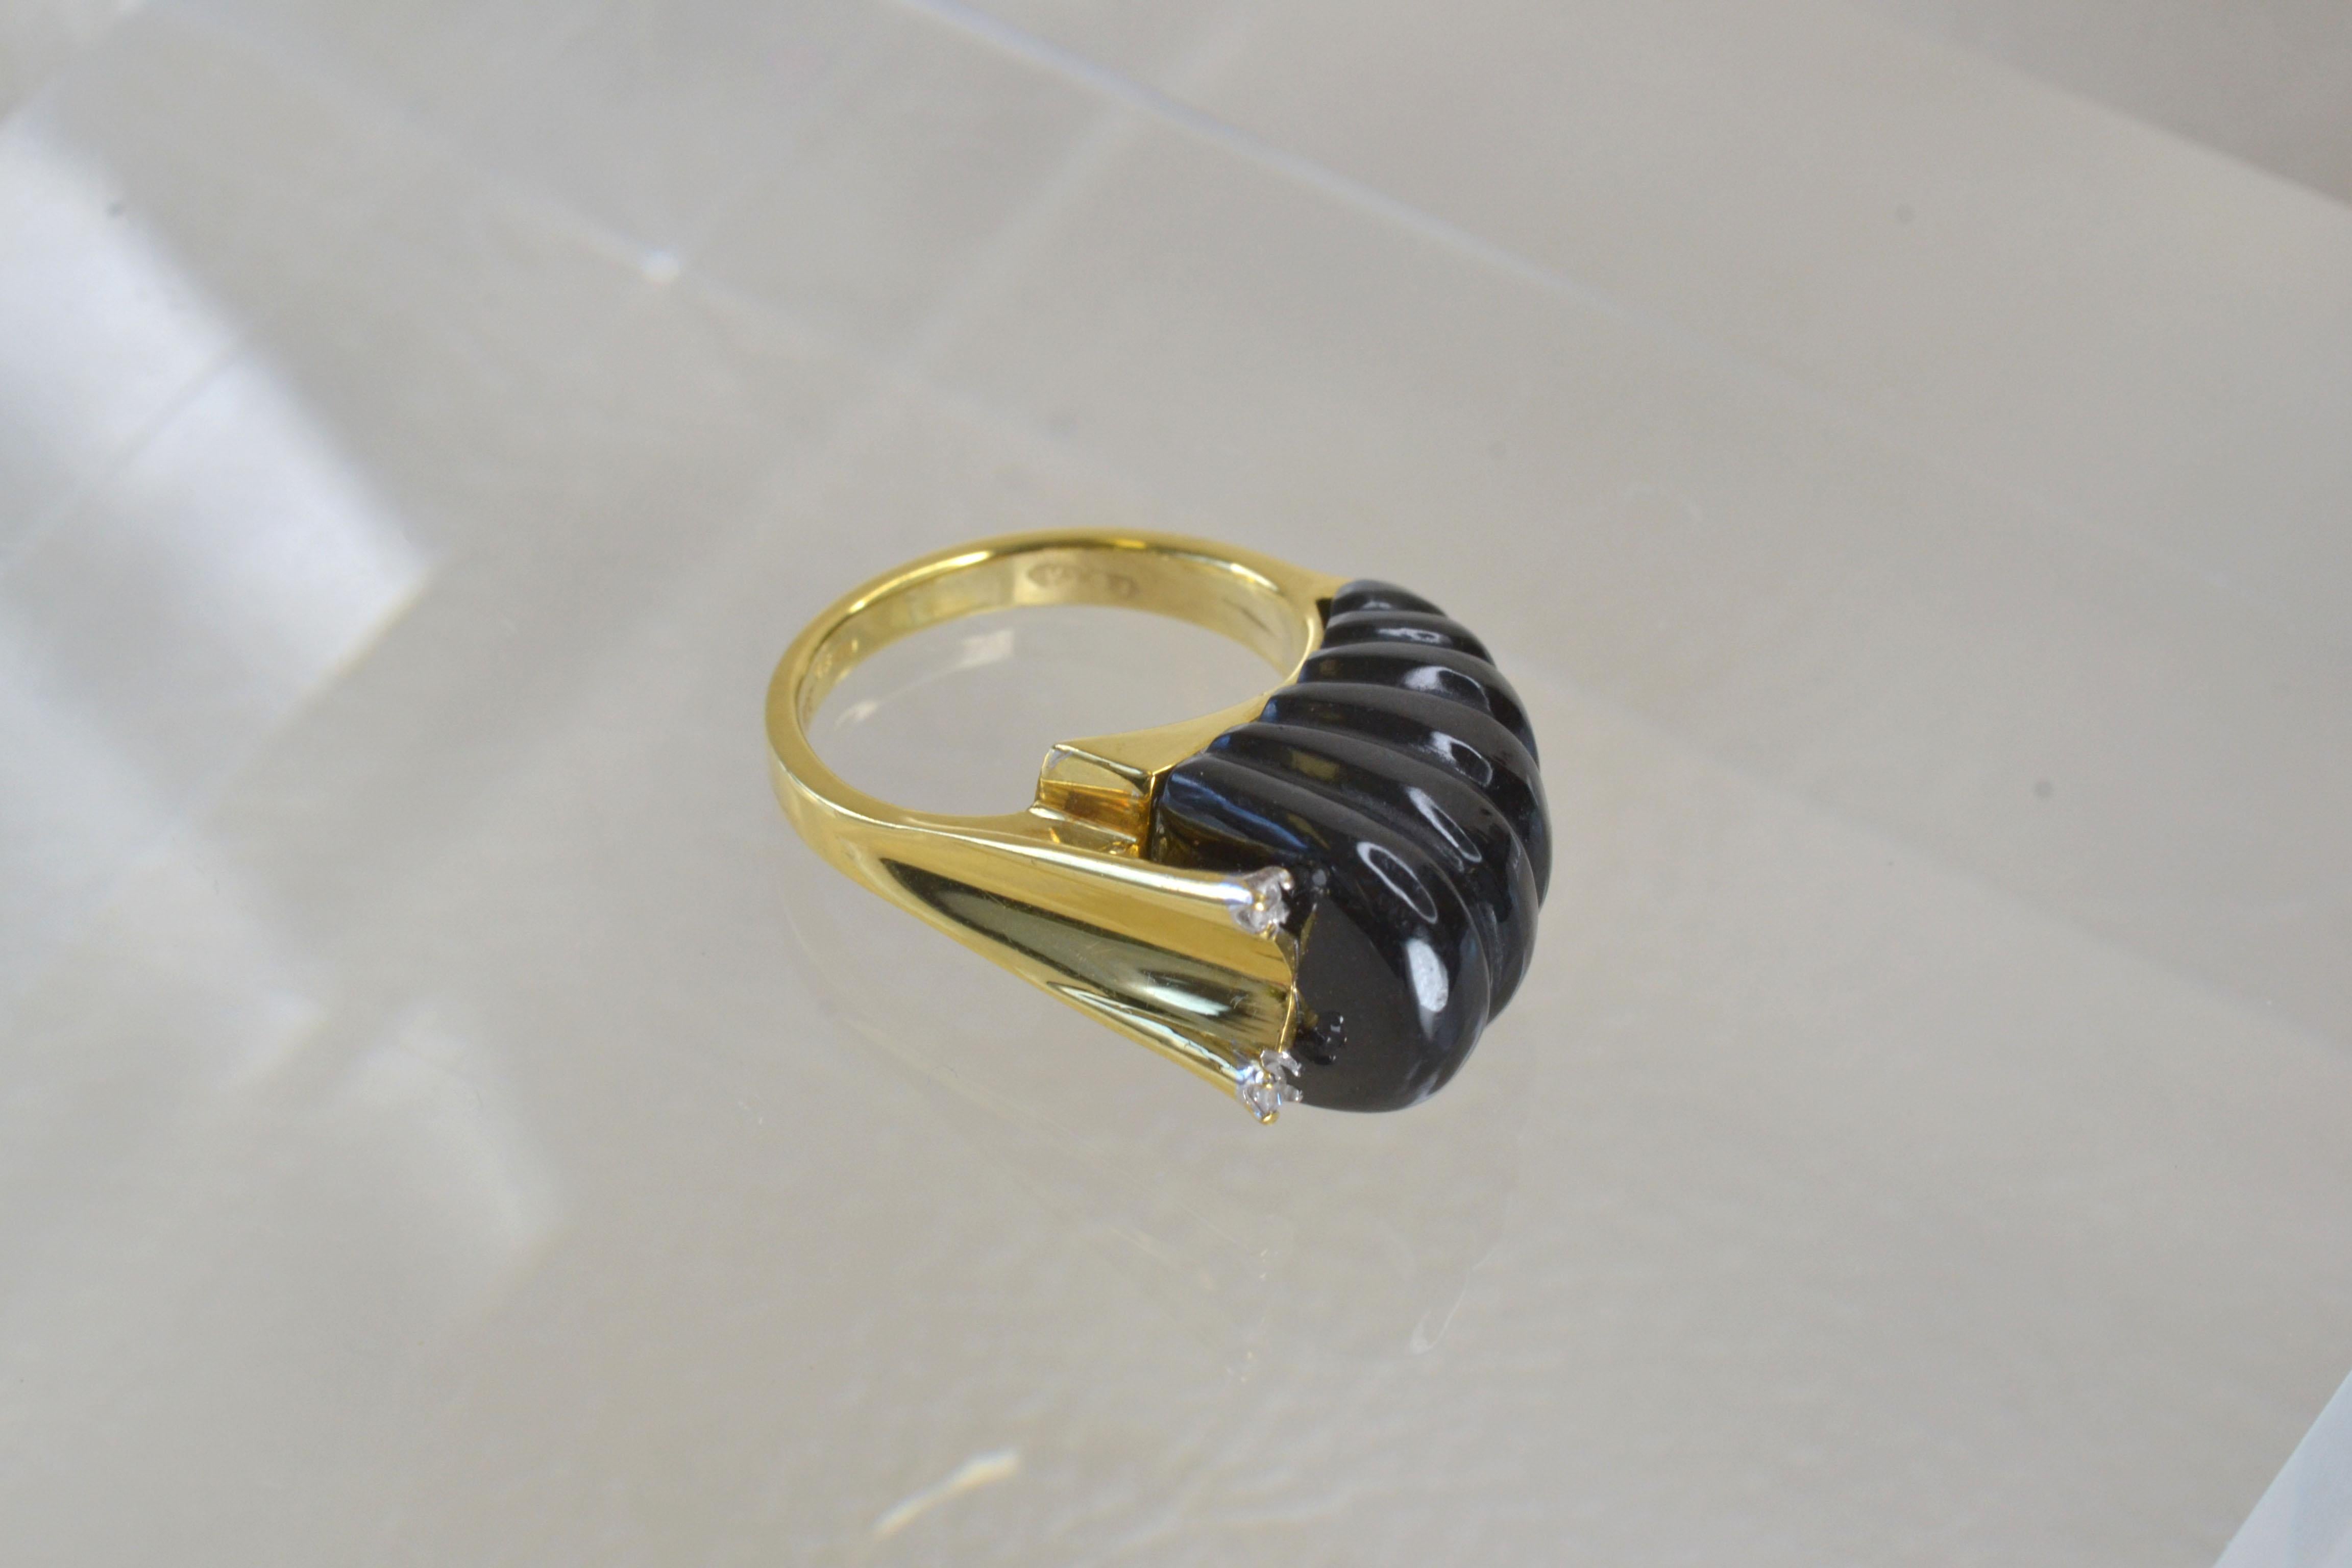 Cabochon Vintage 14k Gold Black Onyx Half Scalloped Ring with Diamonds, One-of-a-kind For Sale